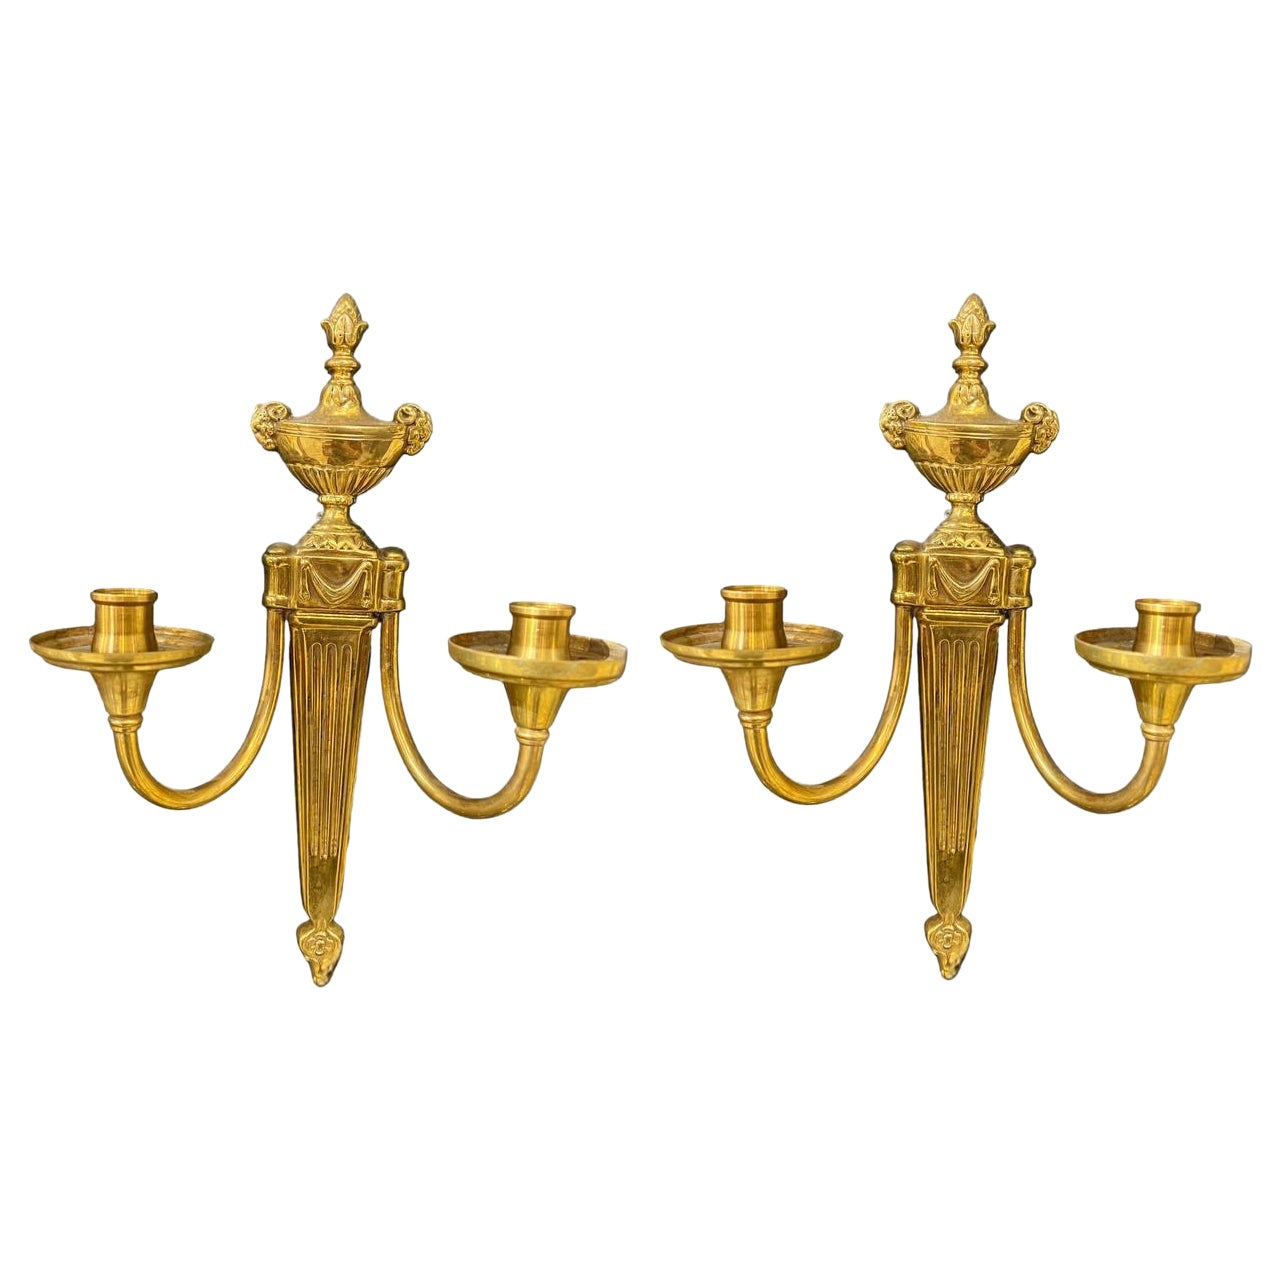 Caldwell Sconces With Rams Heads For Sale